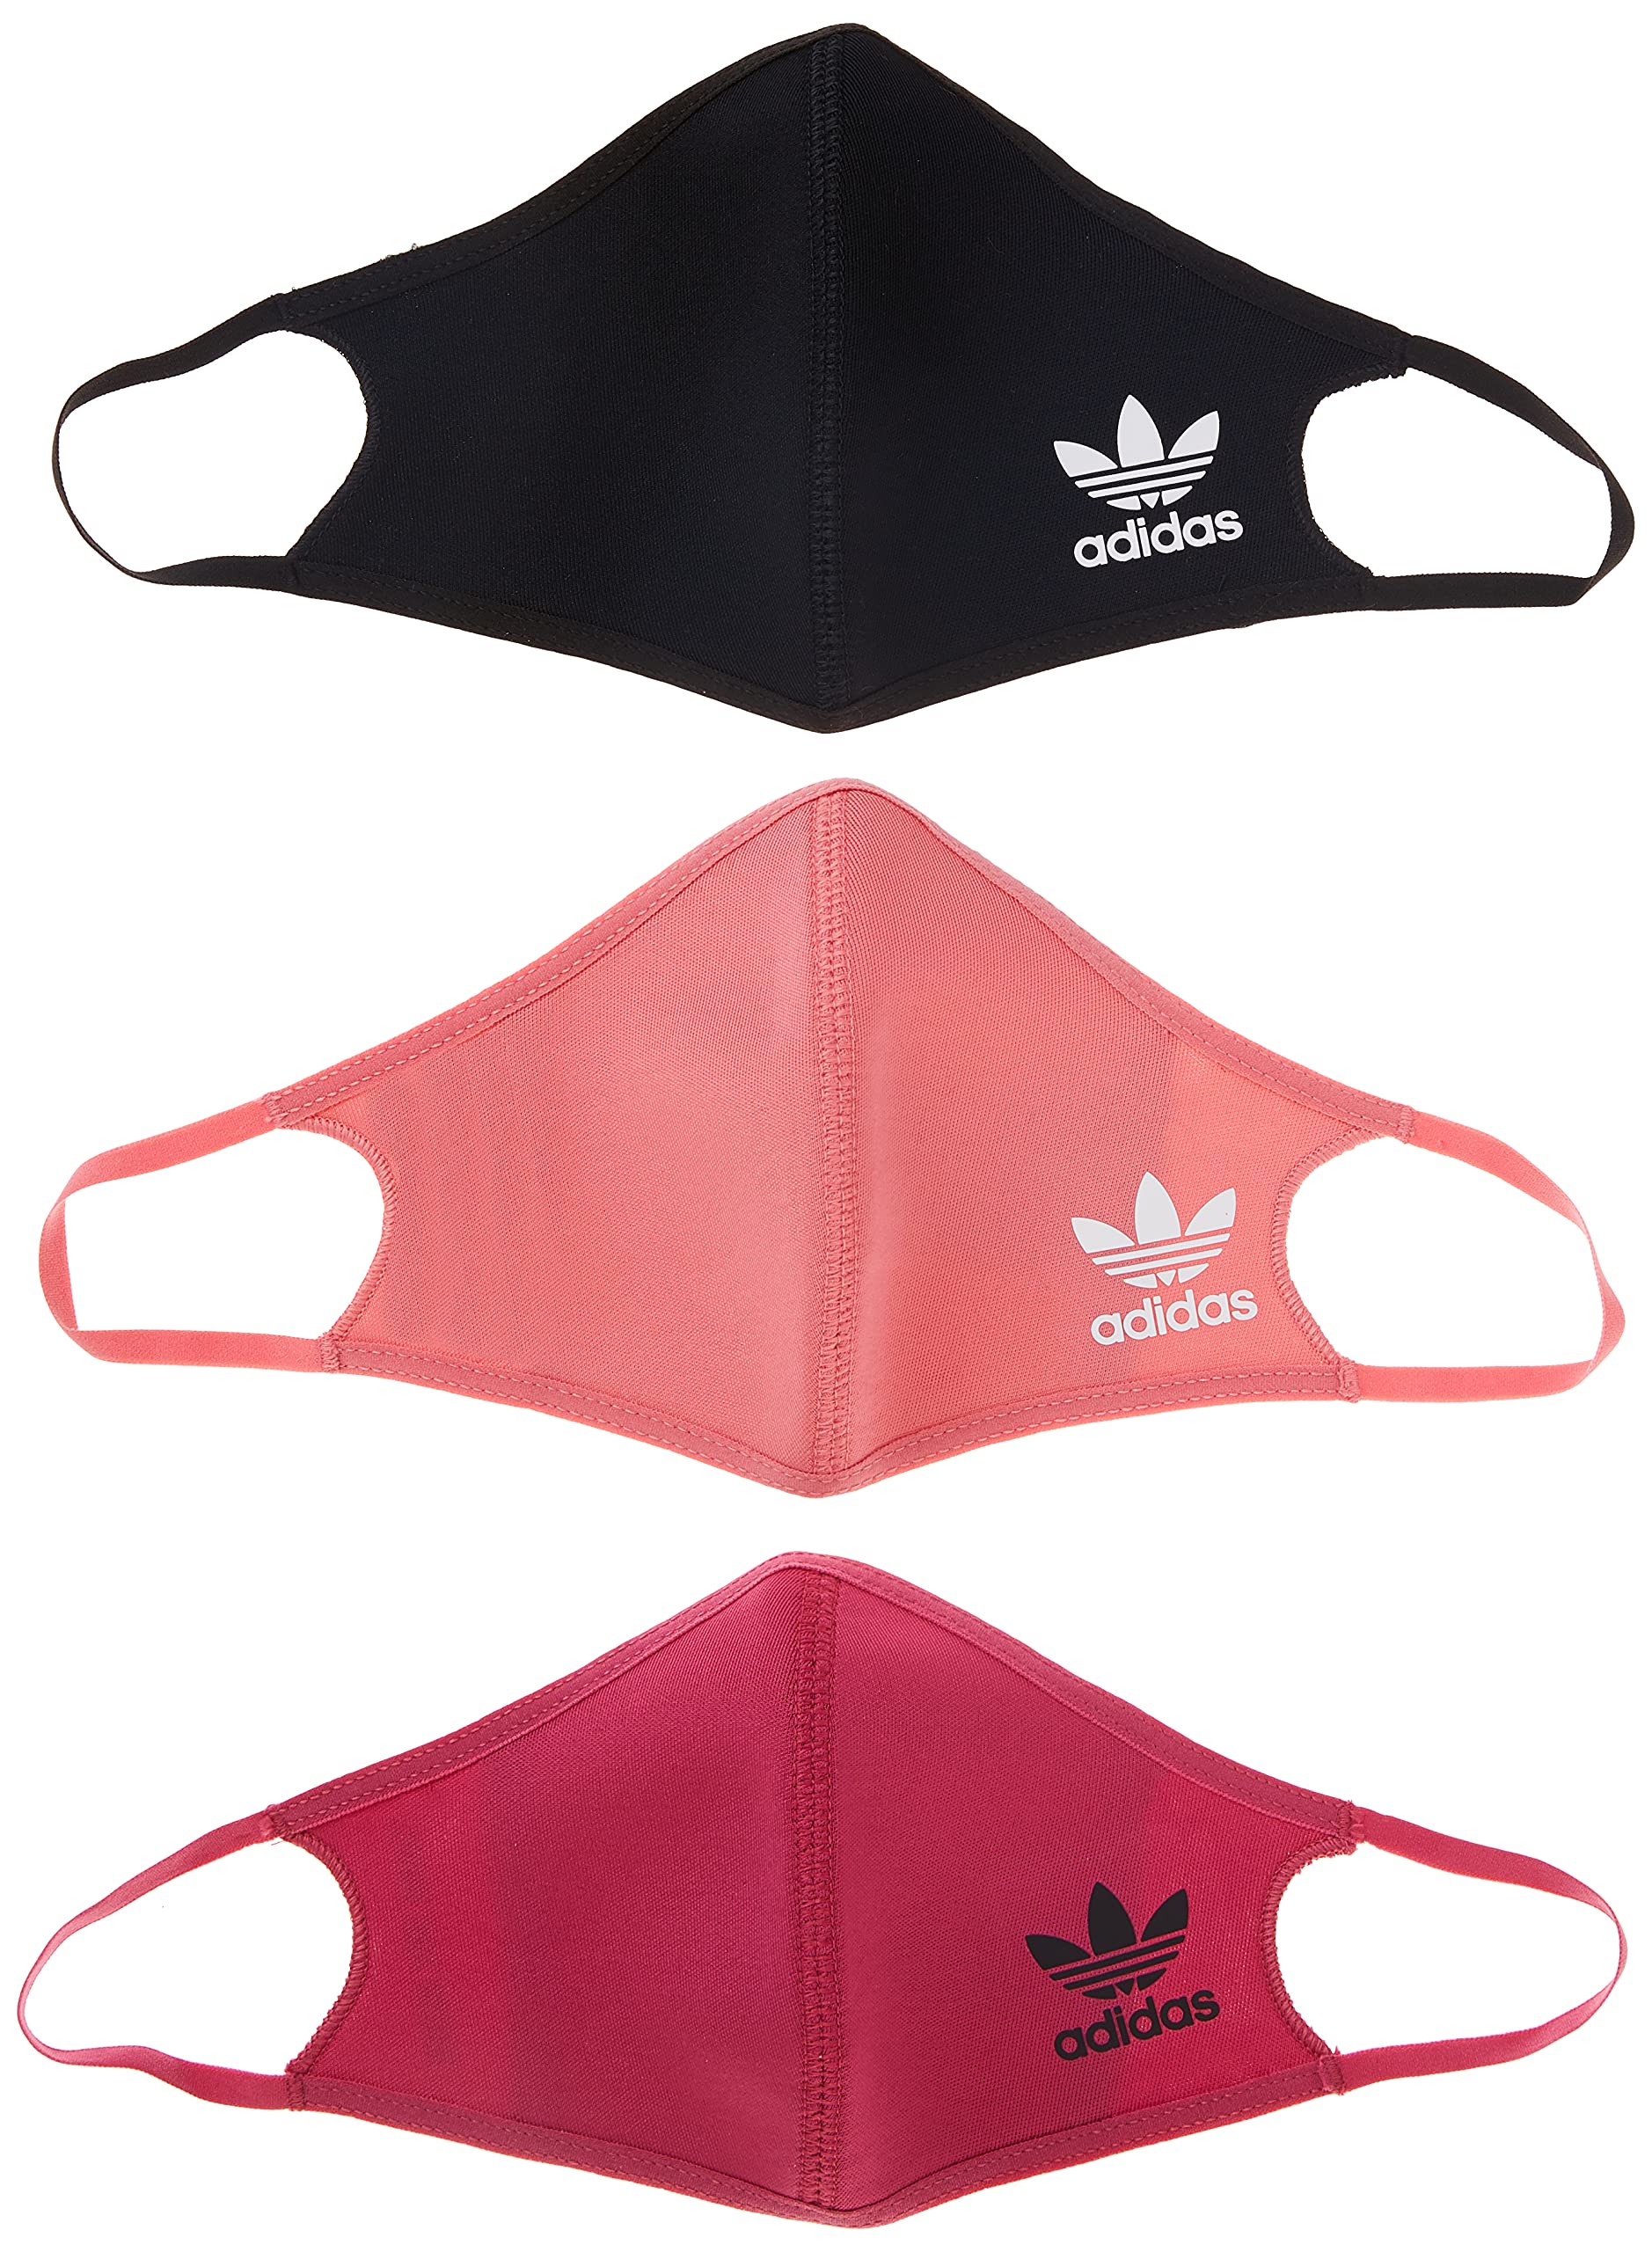 adidas Face Covers, 3-pack, Unisex Adult, Wild Pink/Hazy Rose/Black